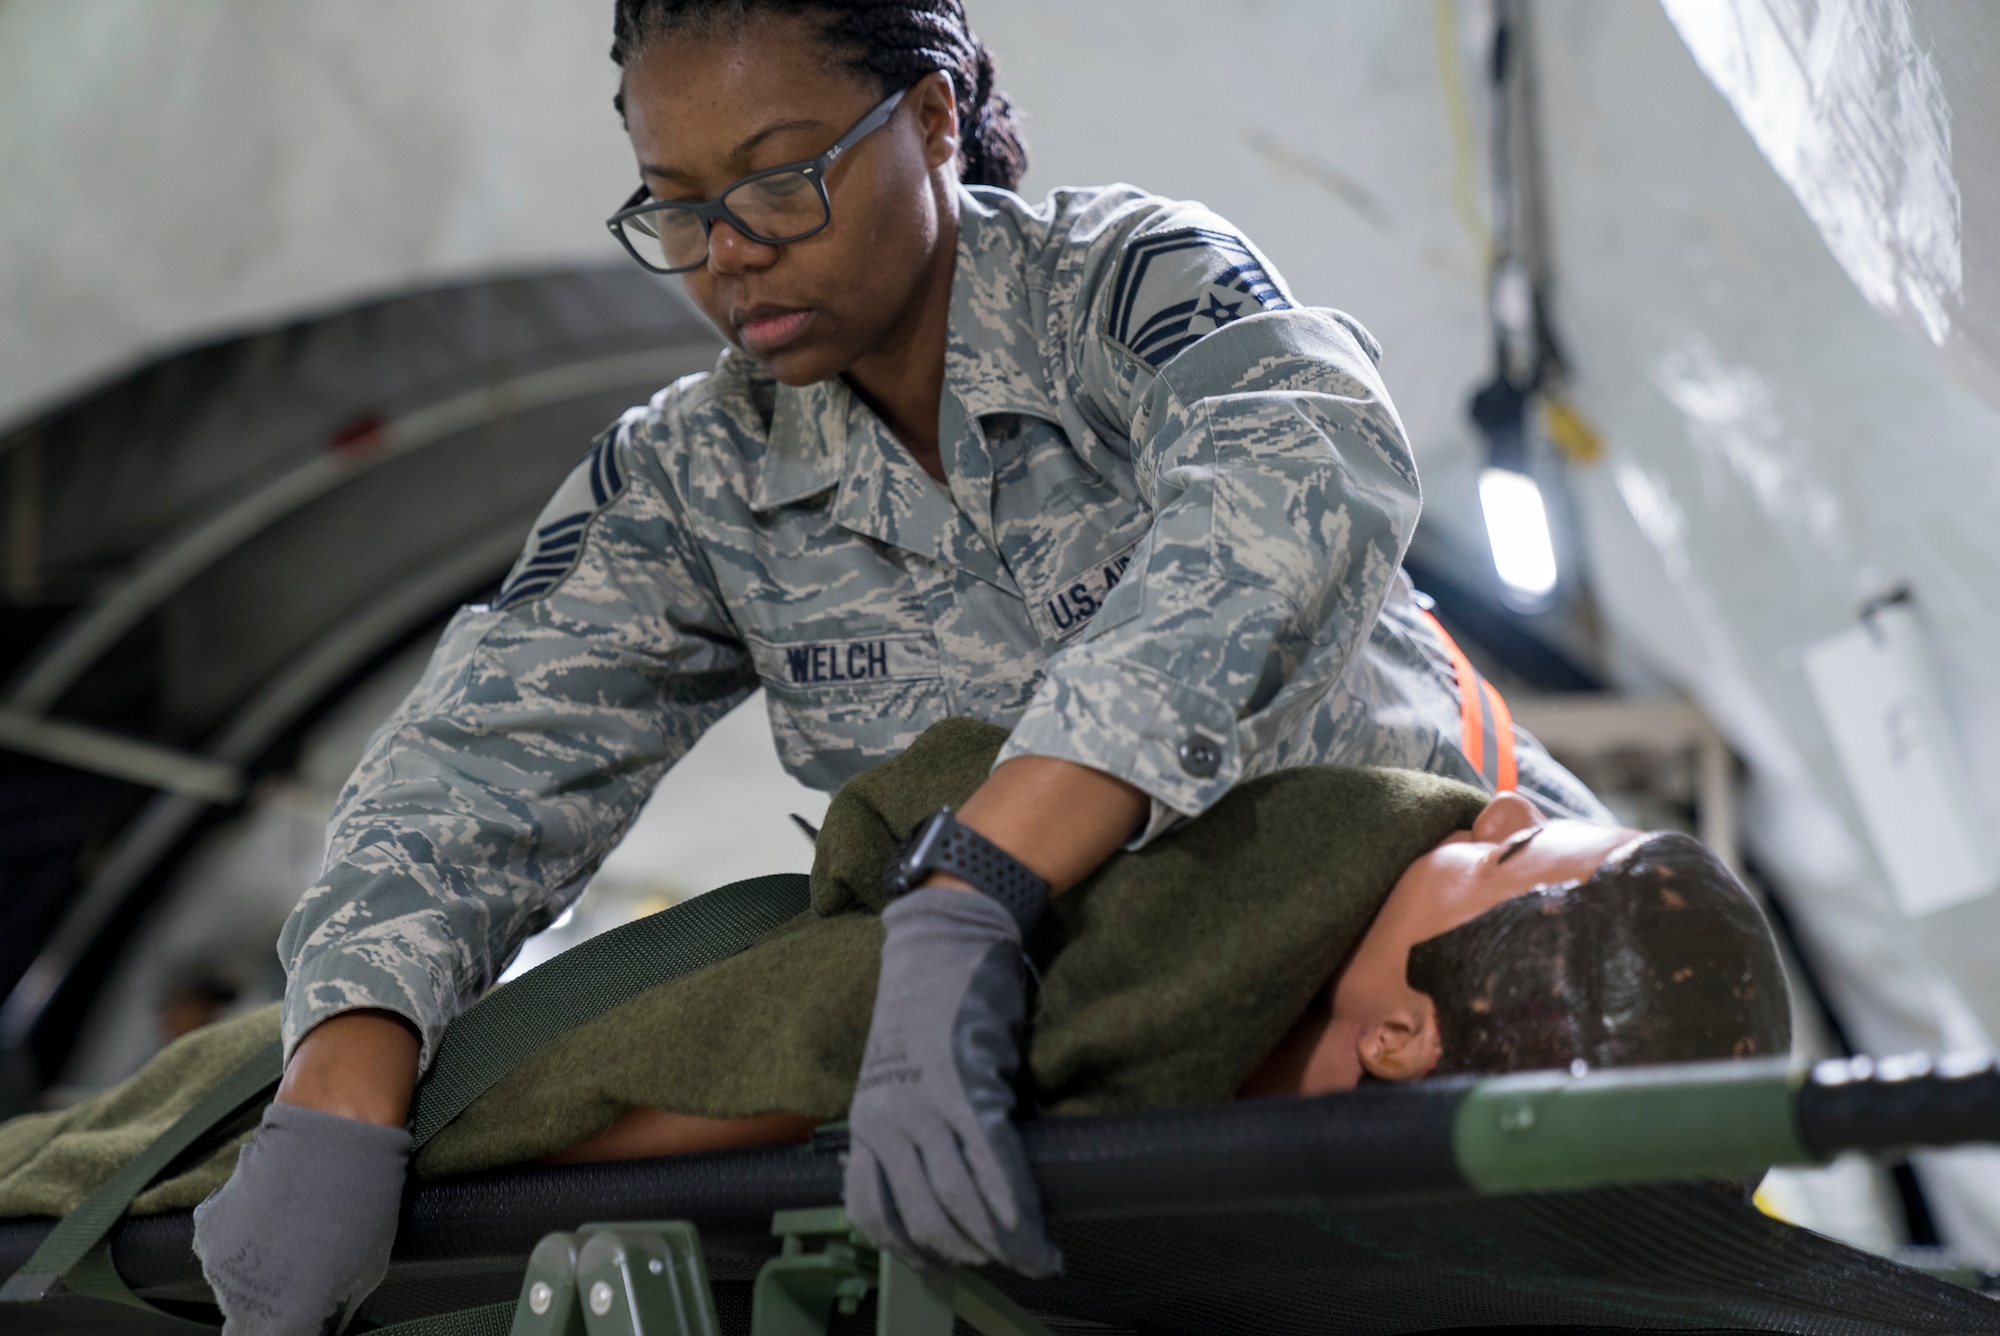 U.S. Air Force Reserve Senior Master Sgt. Nolisa Welch, 413th Aeromedical Staging Squadron superintendent of nursing services, secures a simulated patient during Exercise Ultimate Caduceus 2018 at Travis Air Force Base, California, Aug. 22, 2018. Ultimate Caduceus 2018 is an annual patient movement exercise designed to test the ability of U.S. Transportation Command to provide medical evacuation. (U.S. Air Force photo by Jamal D. Sutter)